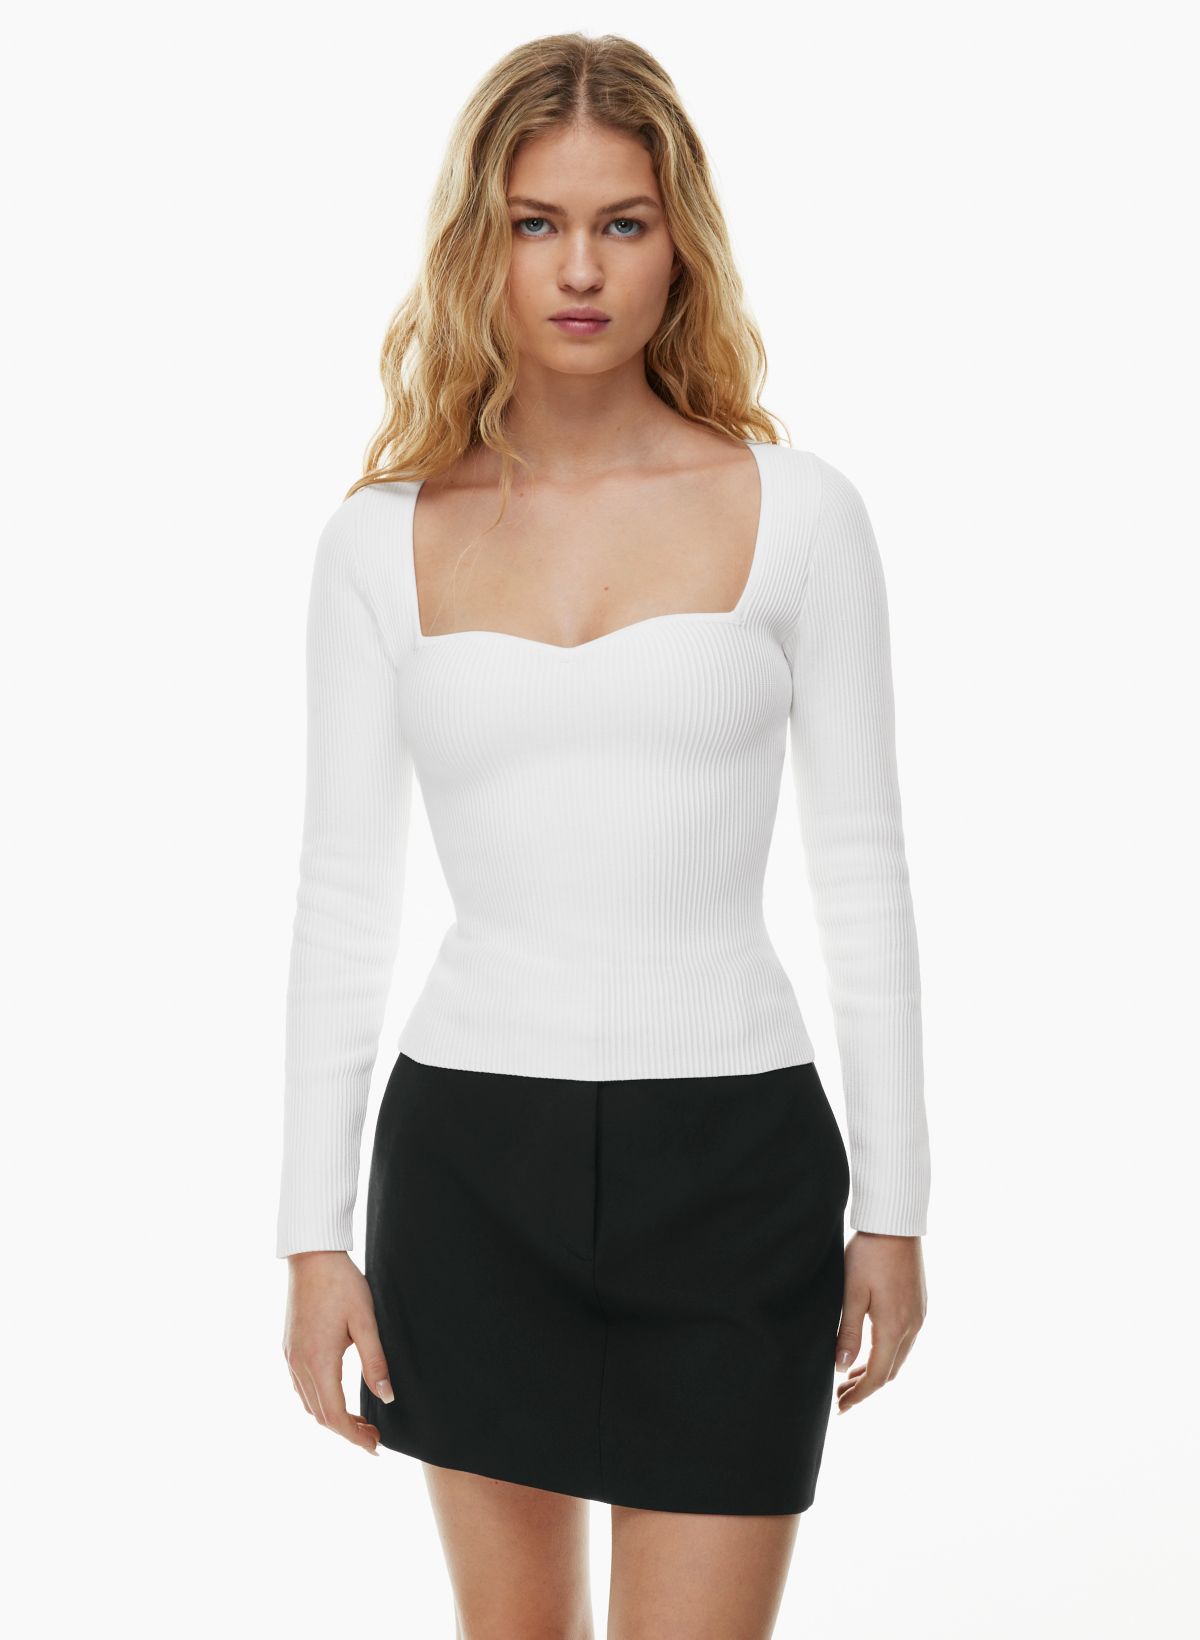  Other Stories sweetheart neckline knit top in white